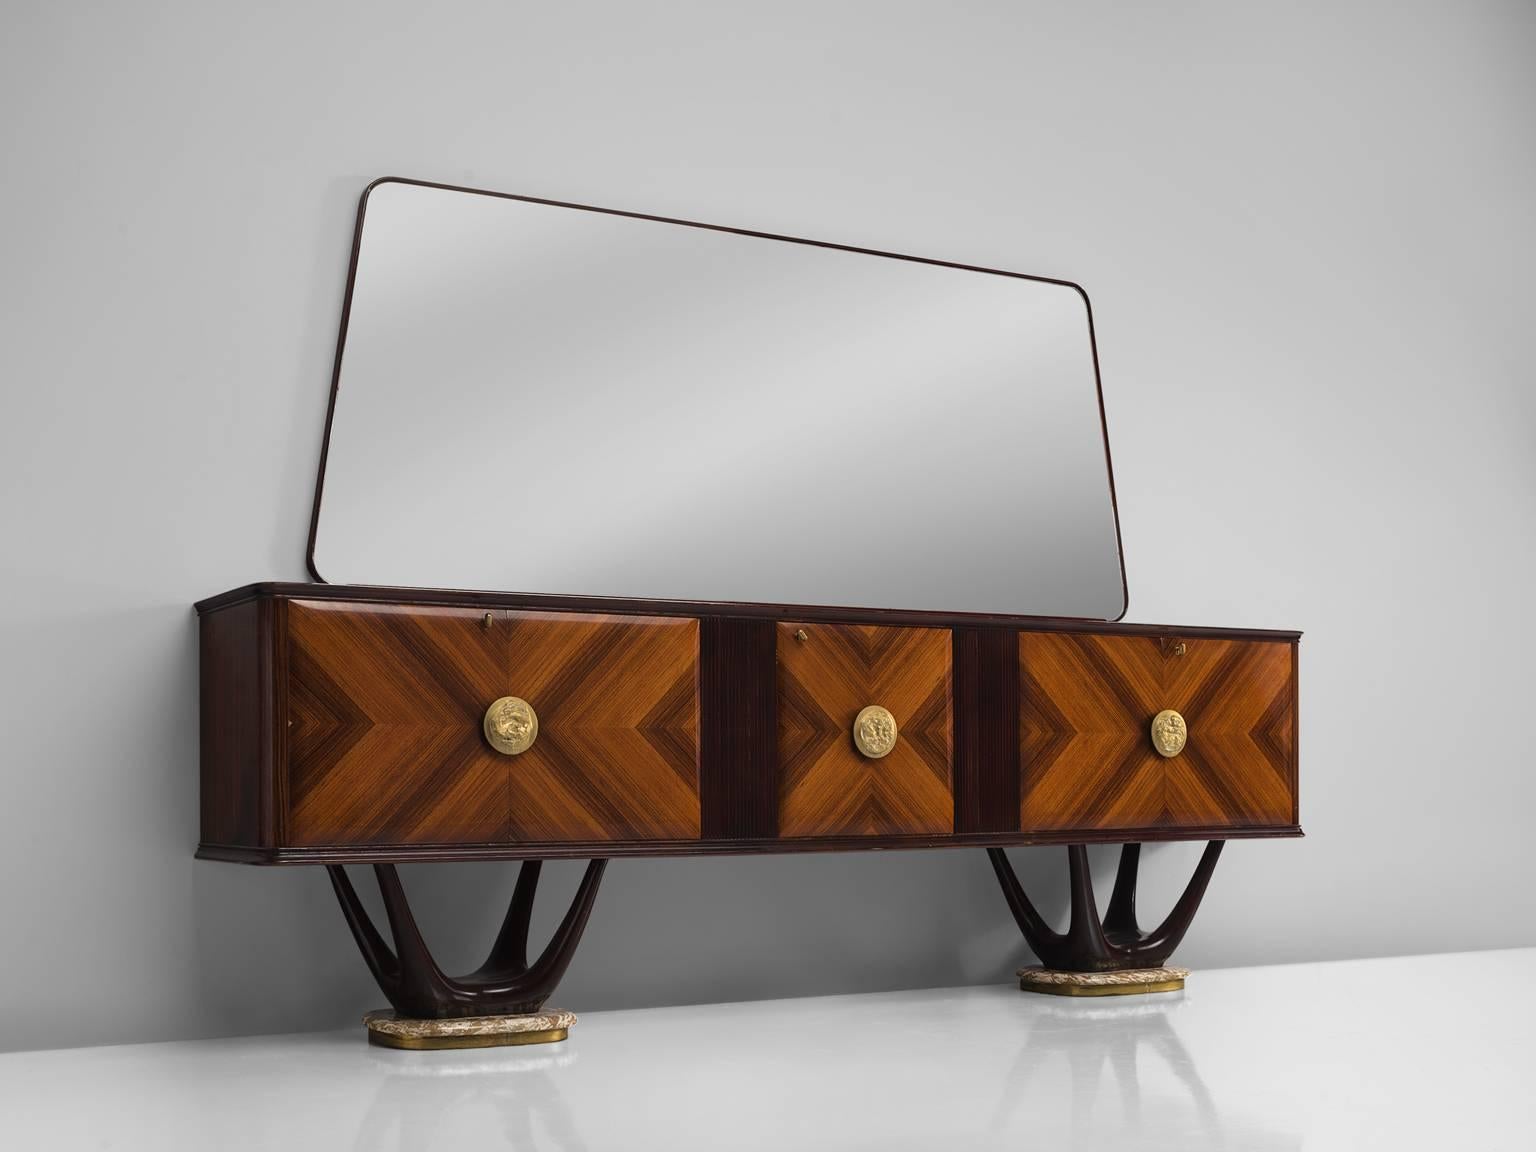 Fratelli Turri, sideboard, in mahogany, rosewood, maple, marble, glass and brass, Italy, 1950s.

This theatrical credenza features a large mirror in the style of Vittorio Dassi. The cabinet itself is made of a mahogany construction. The doors are